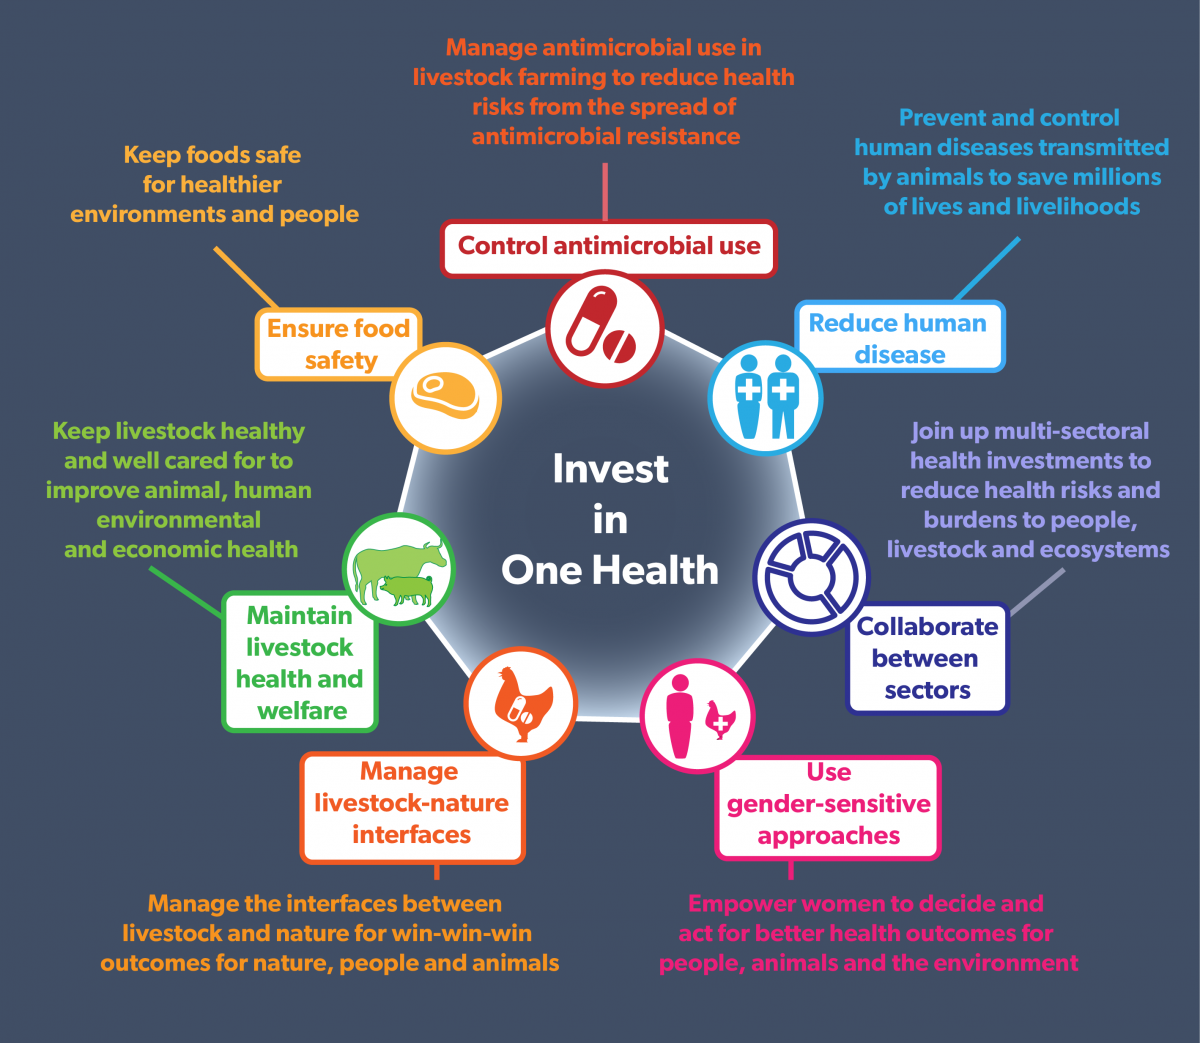 Livestock pathways to 2030: Seven ways to invest in One Health